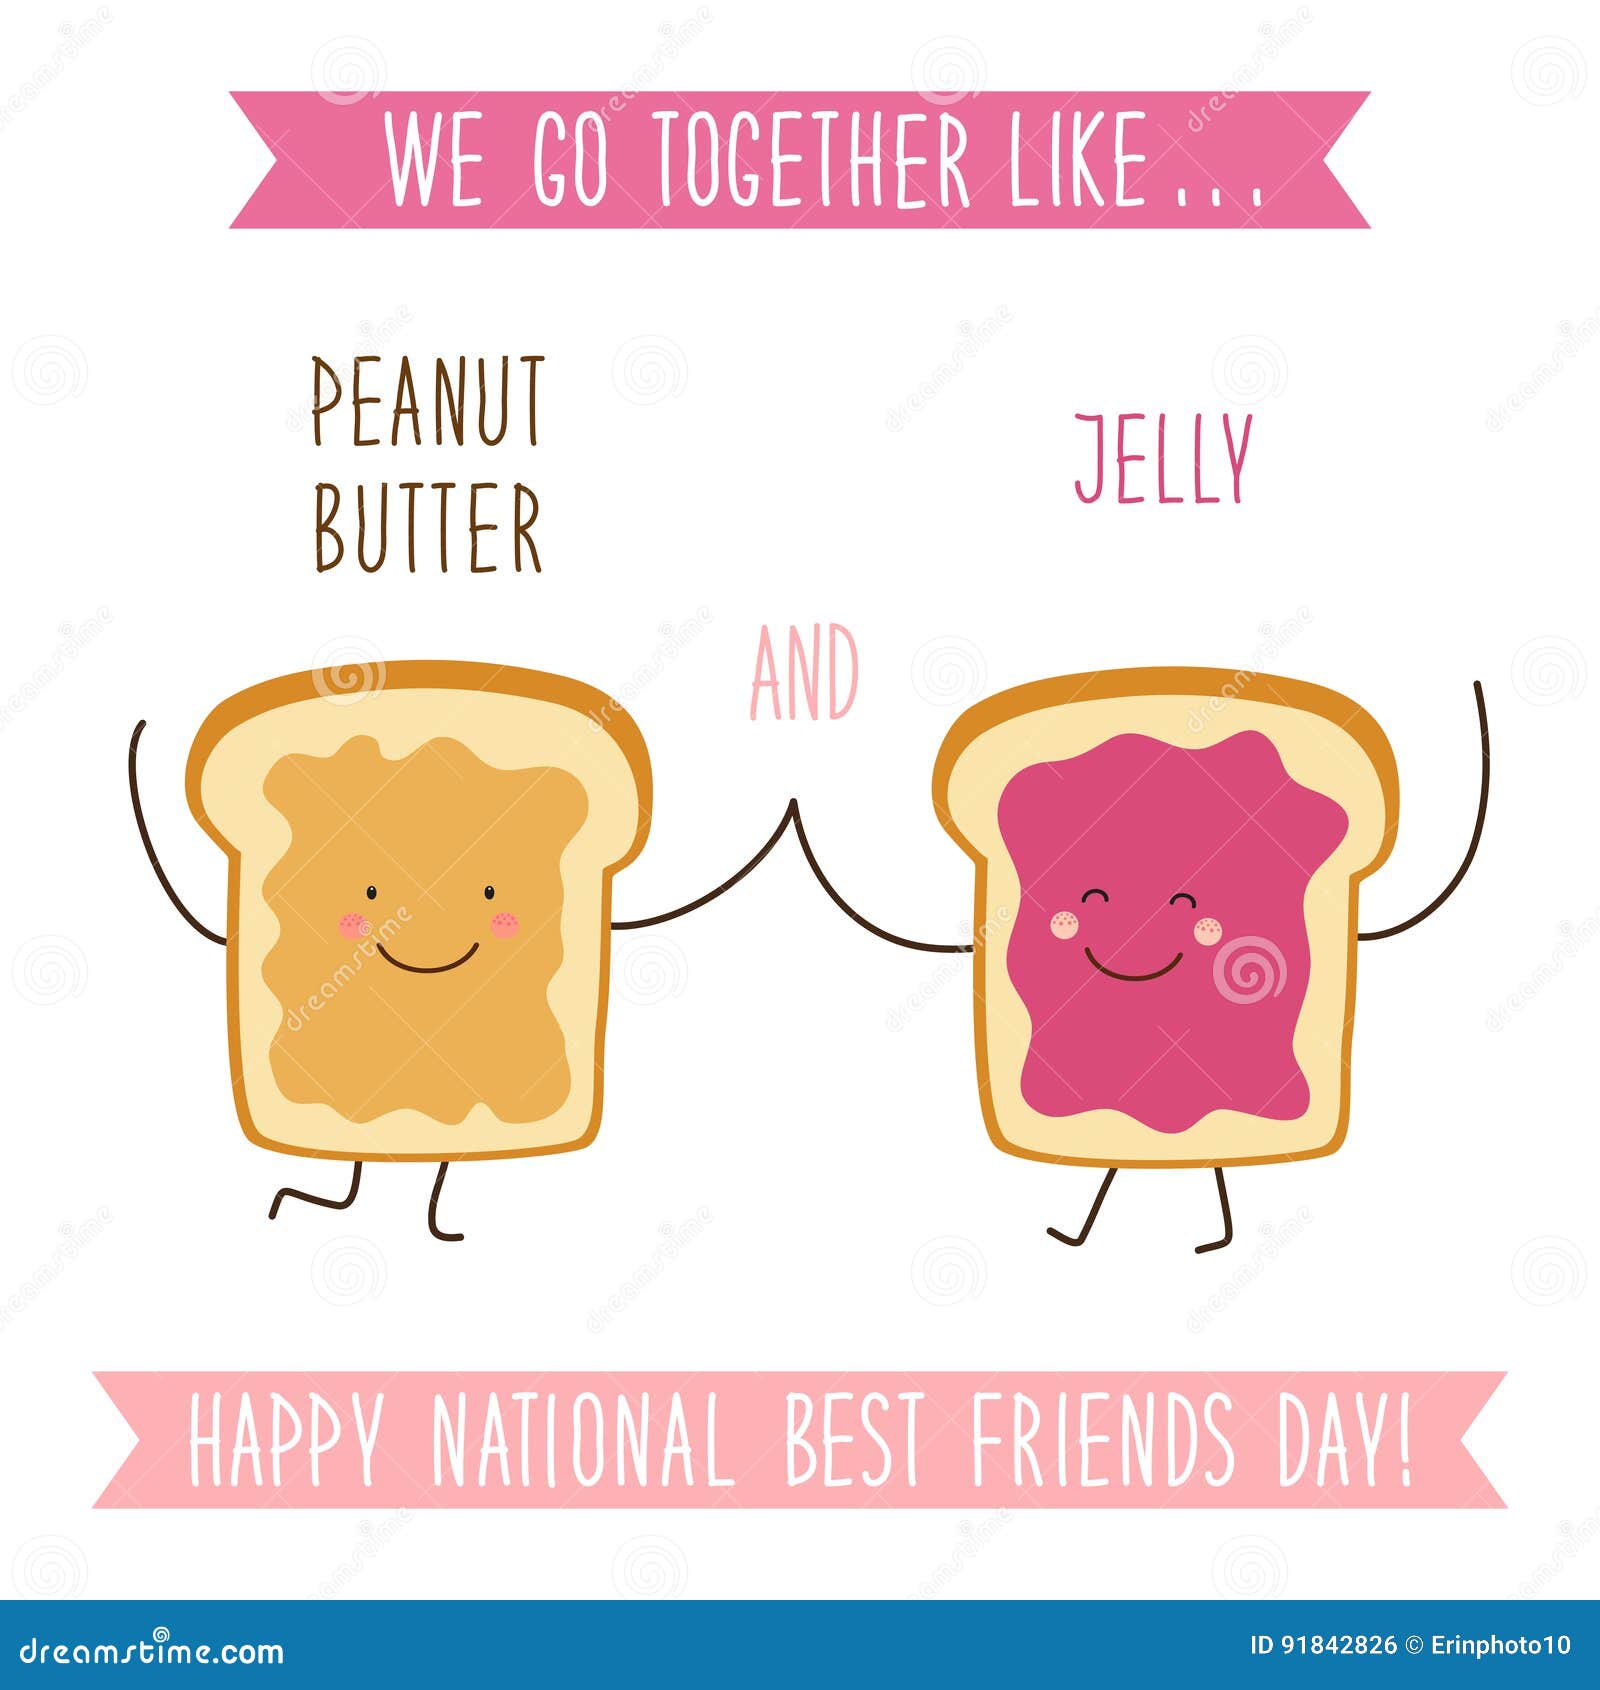 Cute Unusual National Best Friends Day Card As Funny Hand Drawn ...